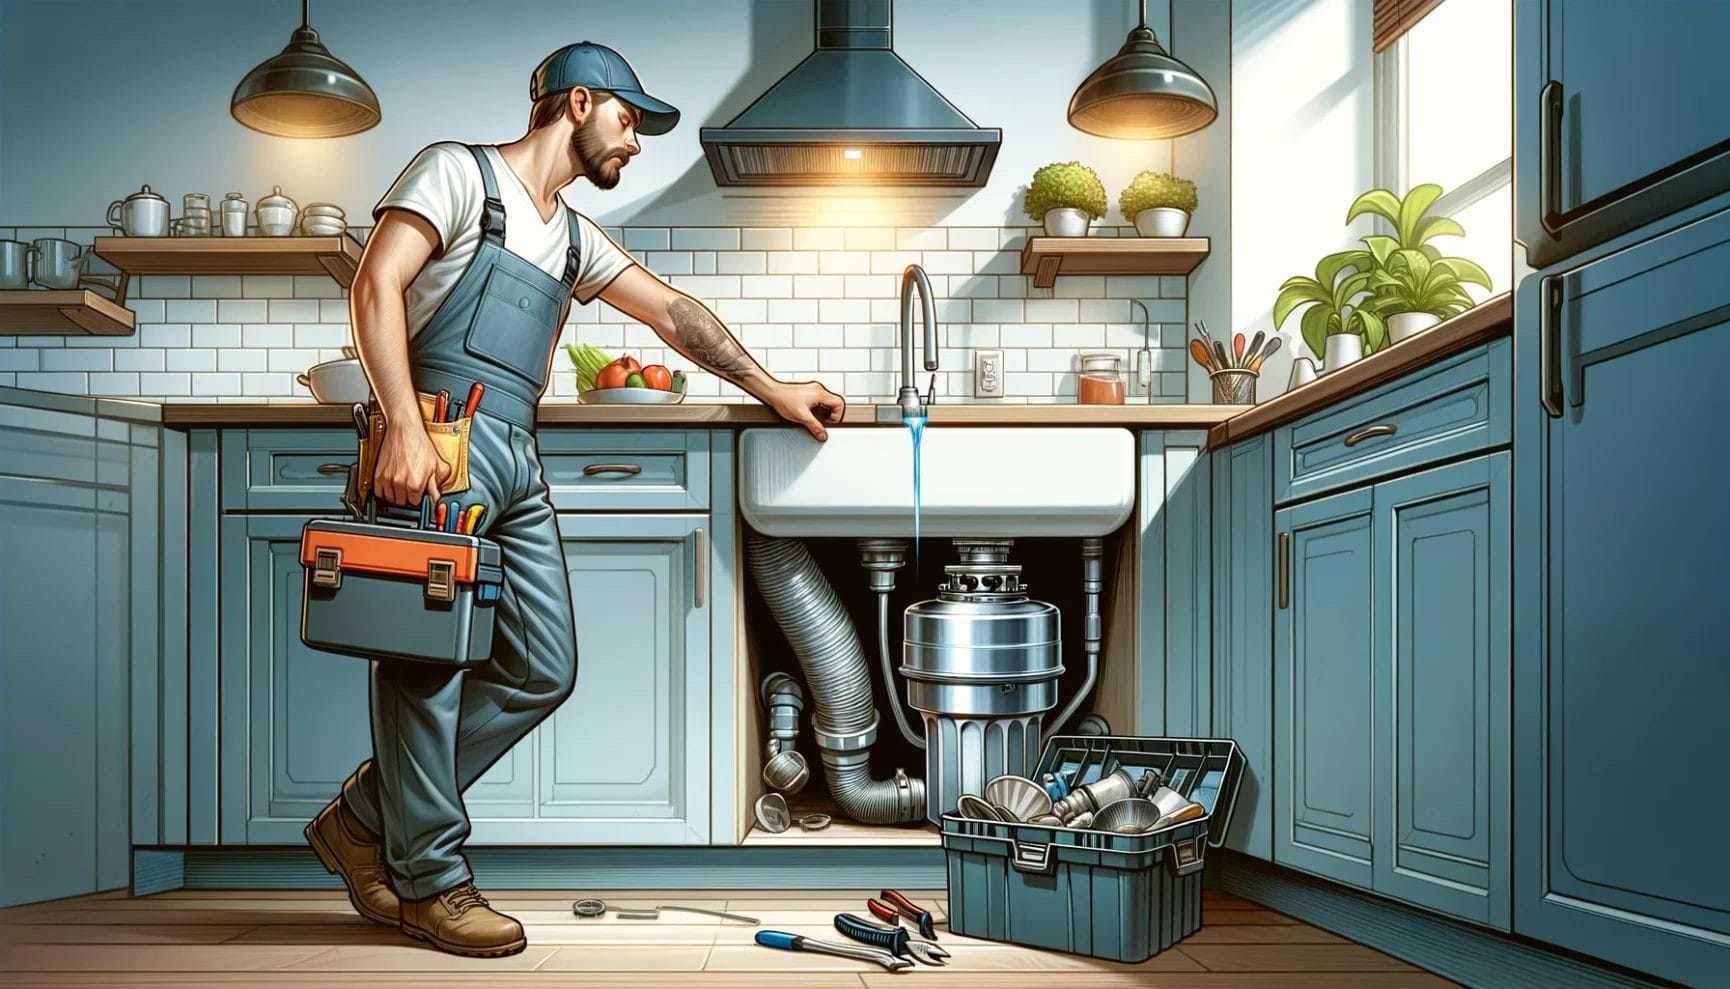 A plumber with a toolbox inspecting the sink plumbing in a kitchen.